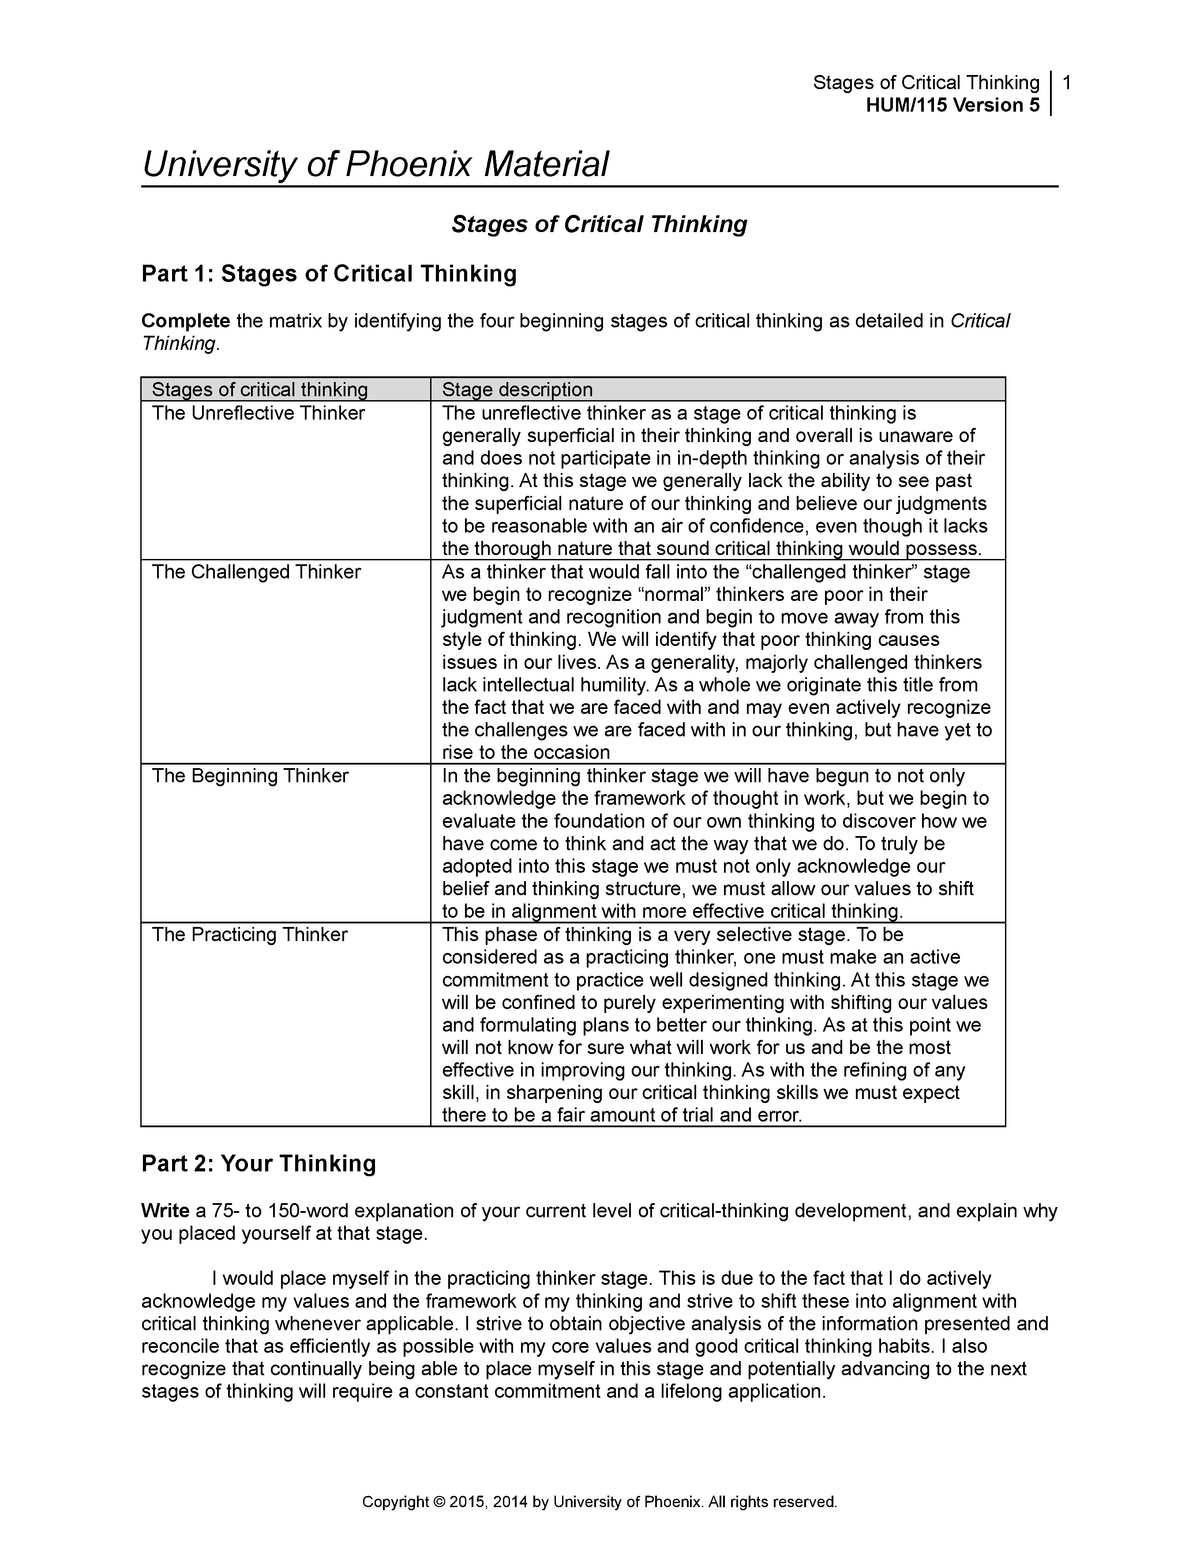 proctored assessment critical thinking assessment entrance